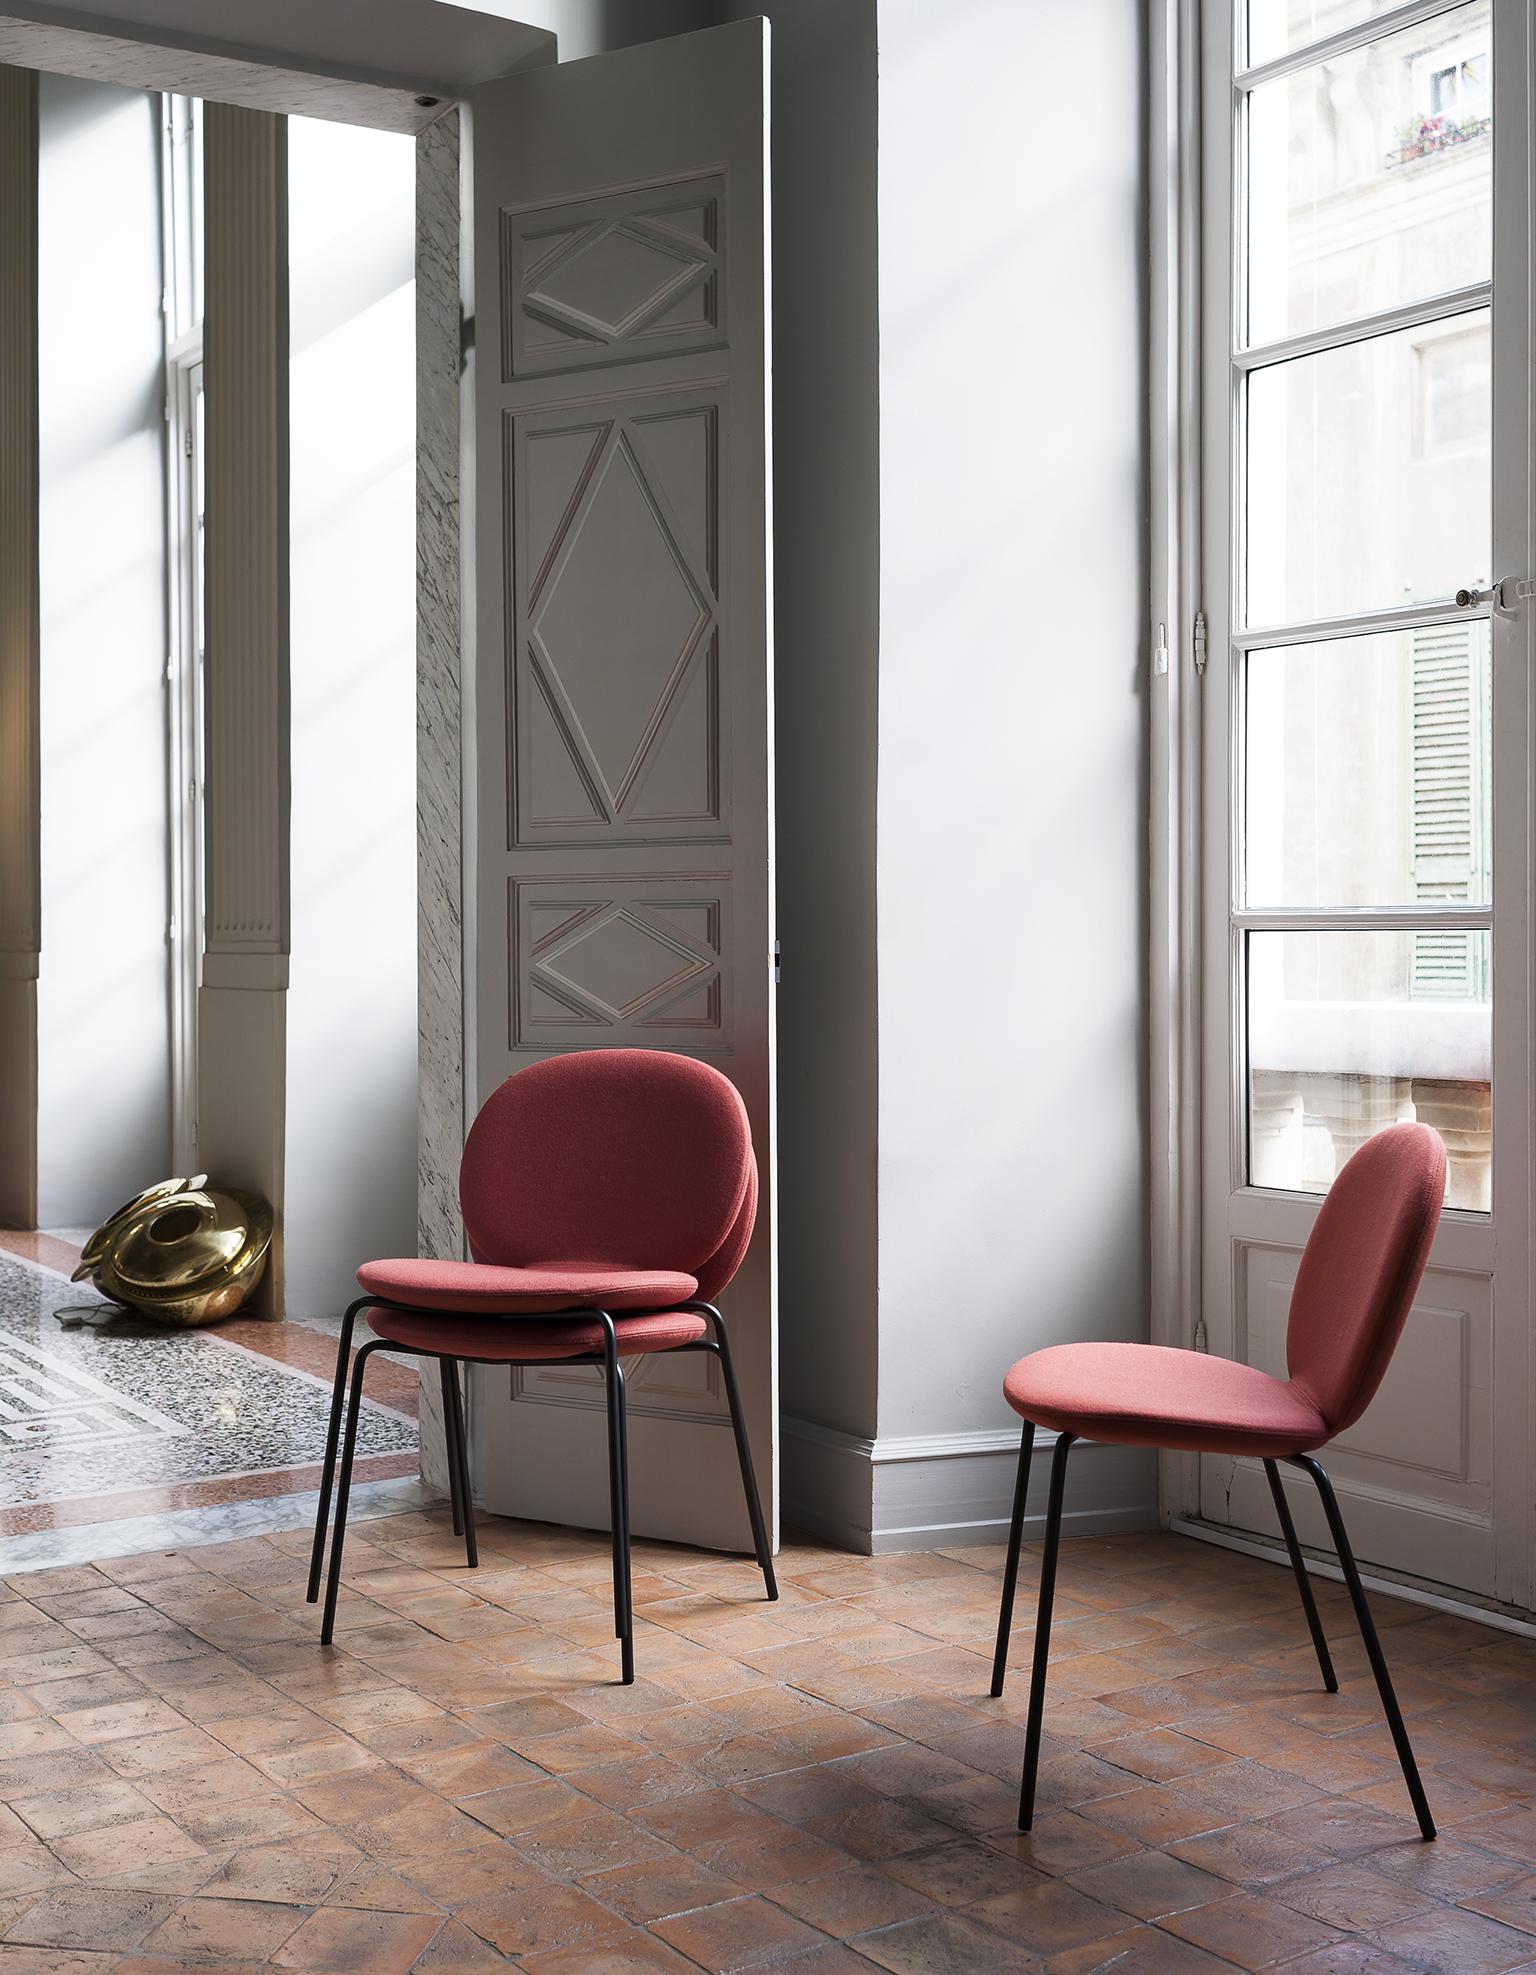 The designer drew inspiration from the work of minimalist artist Ellsworth Kelly, creating a chair with slender metal legs and a padded shell with a simple, linear shape. An essential, sleek chair for cultured and elegant settings, both domestic and